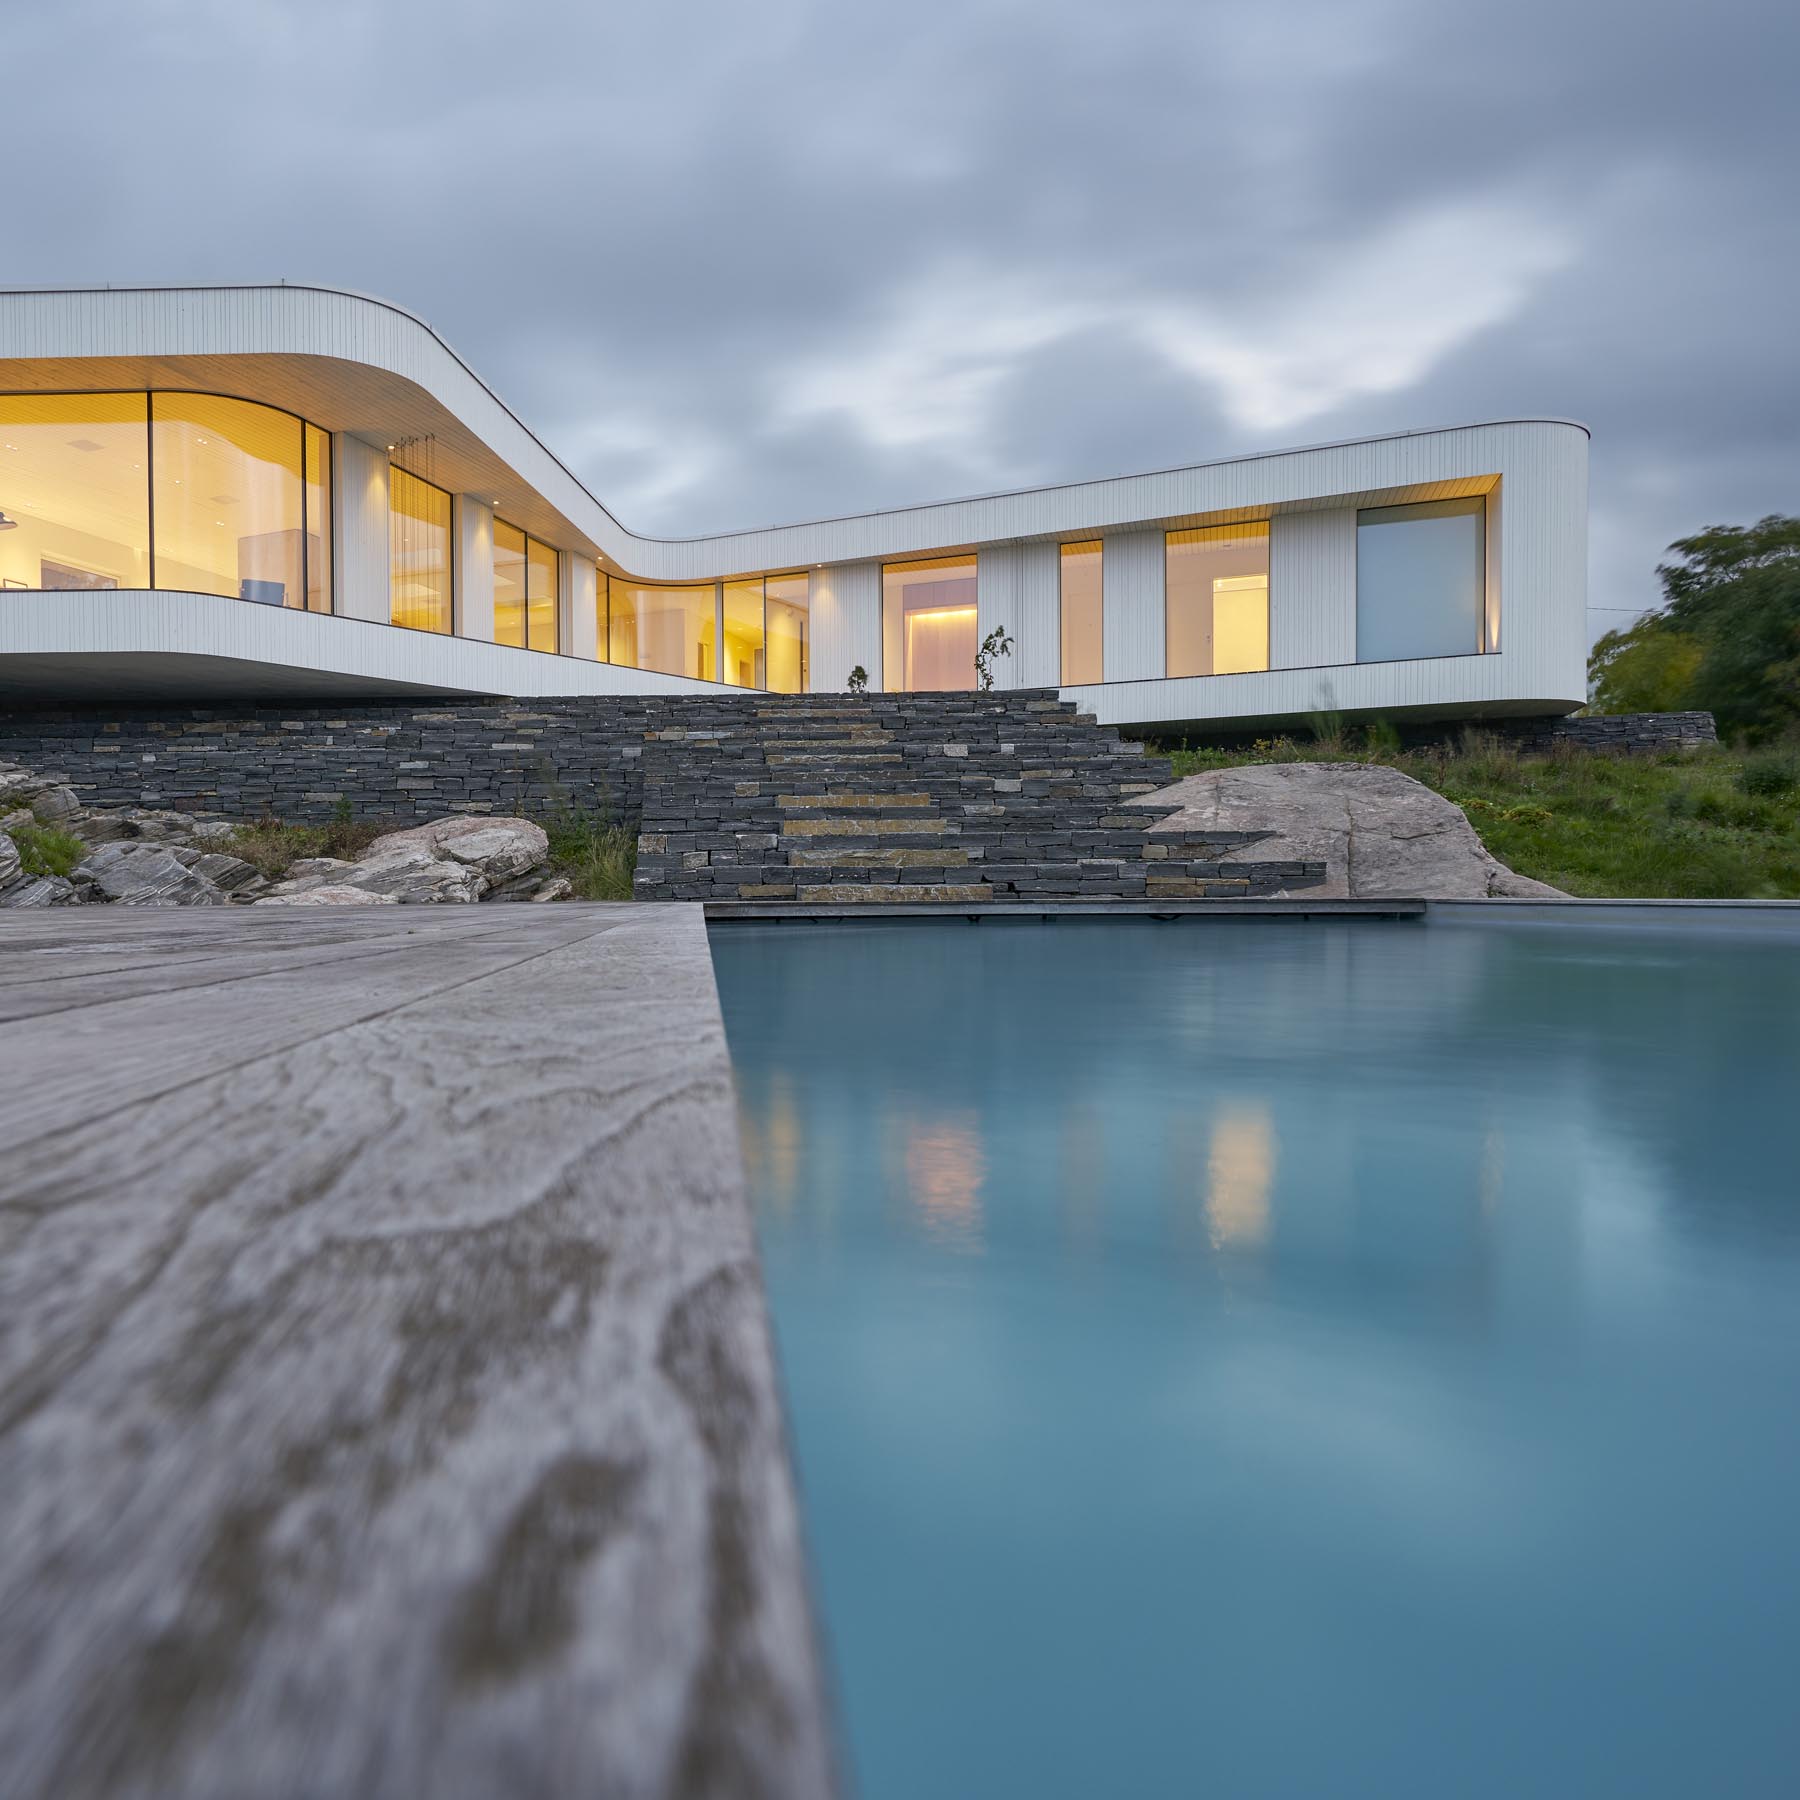 A modern house with a curved design, and a swimming pool.